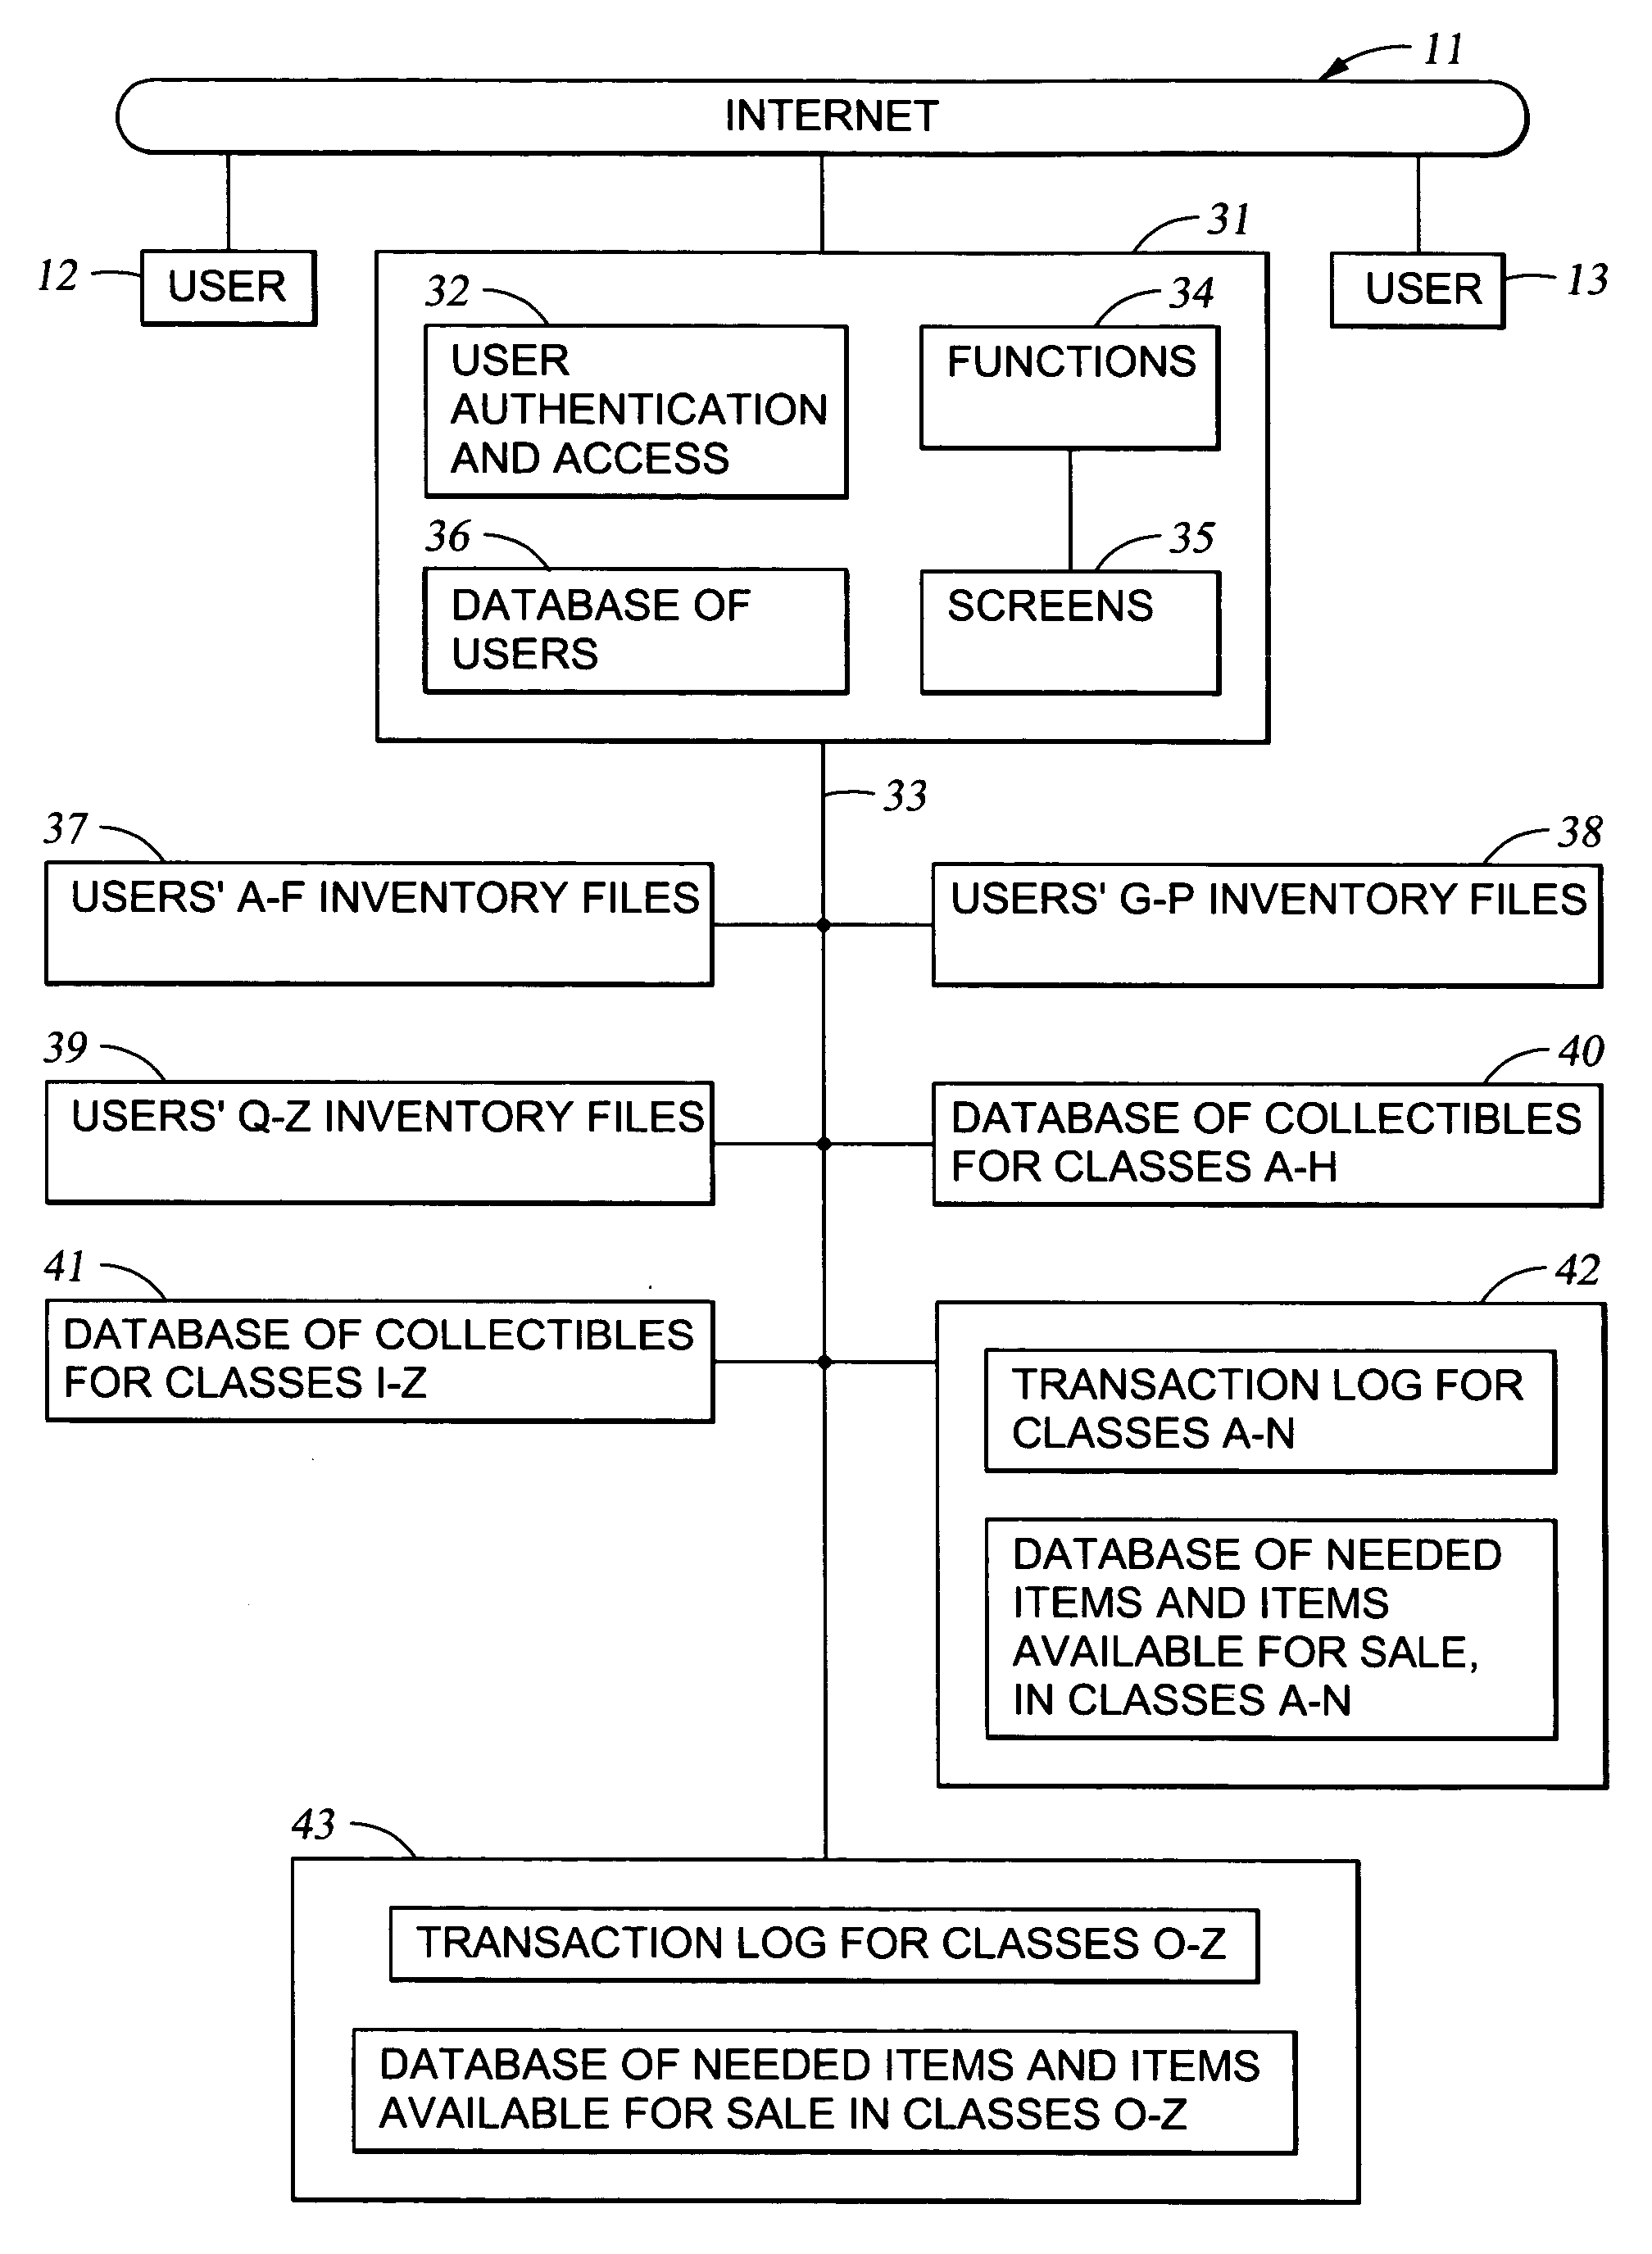 Online method and apparatus for management of collectibles